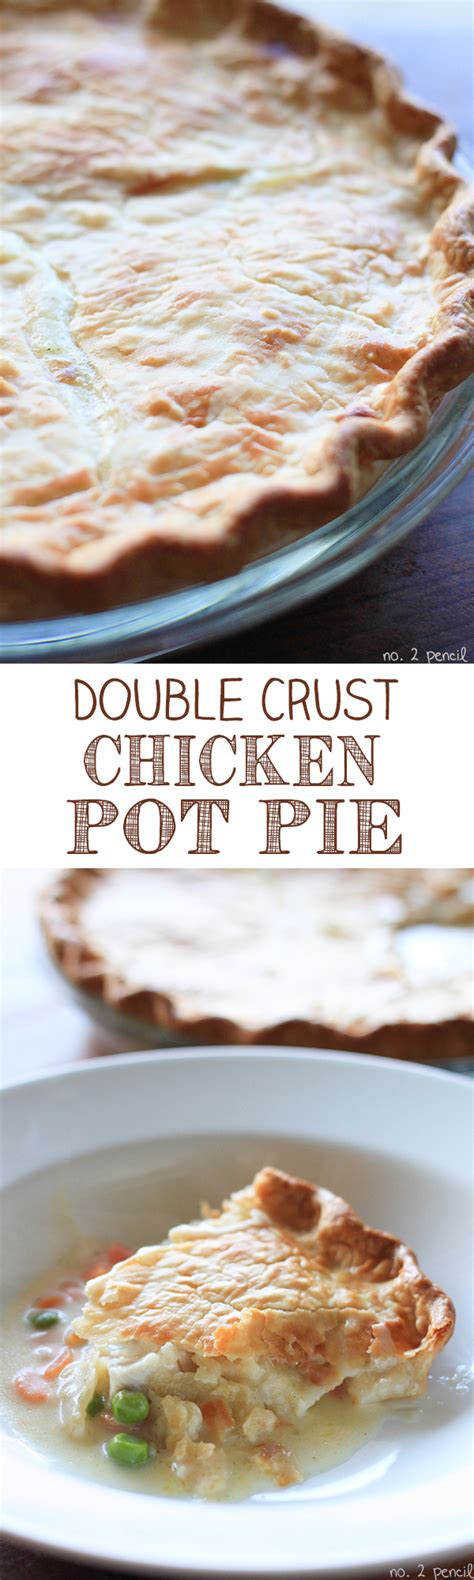 After that, place in a freezer. Double Crust Chicken Pot Pie - Great Freezer Meal Idea